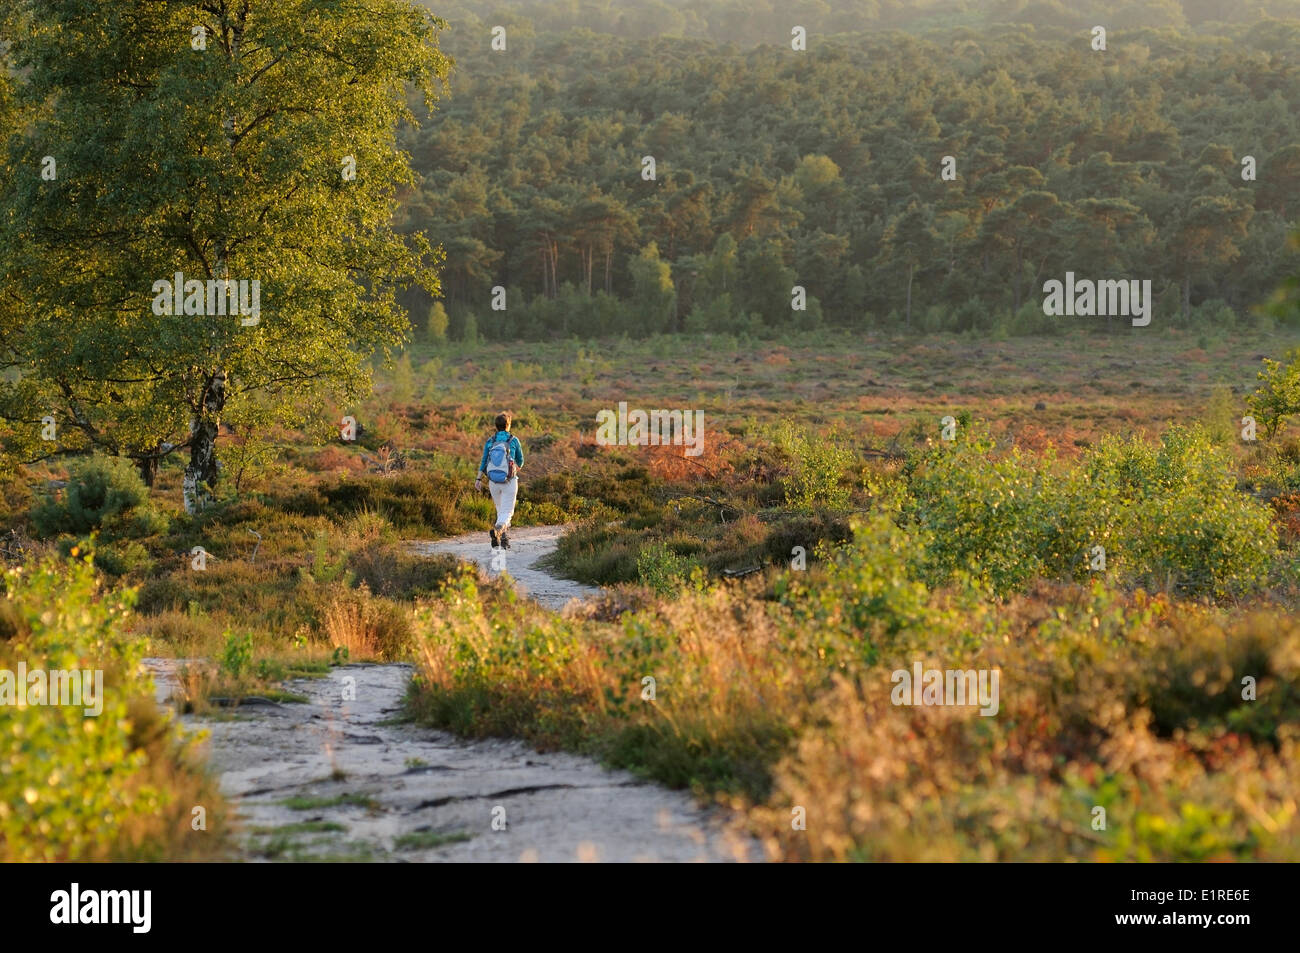 A hiker at the Holterberg, The Netherlands Stock Photo